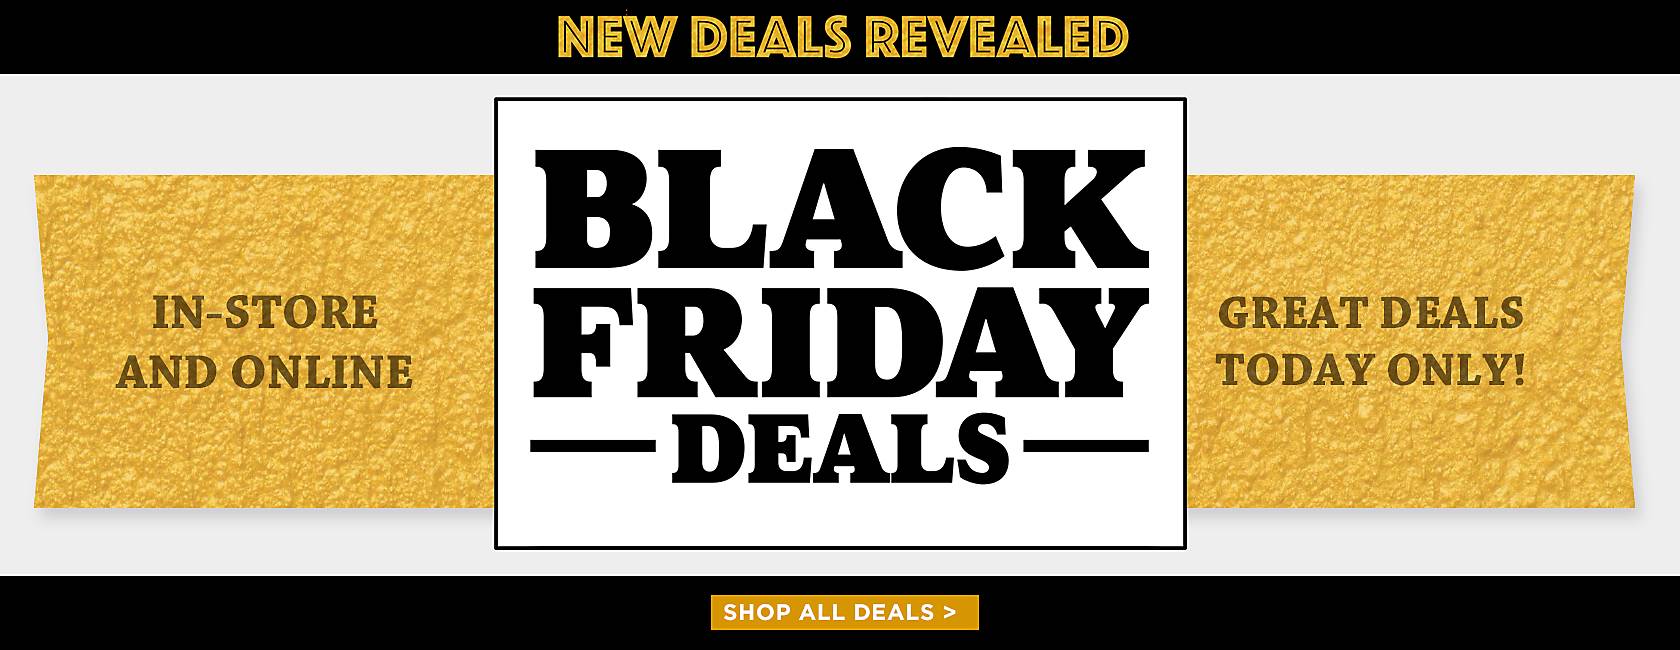 Black Friday Deals - In-store and online - today only - Shop Now